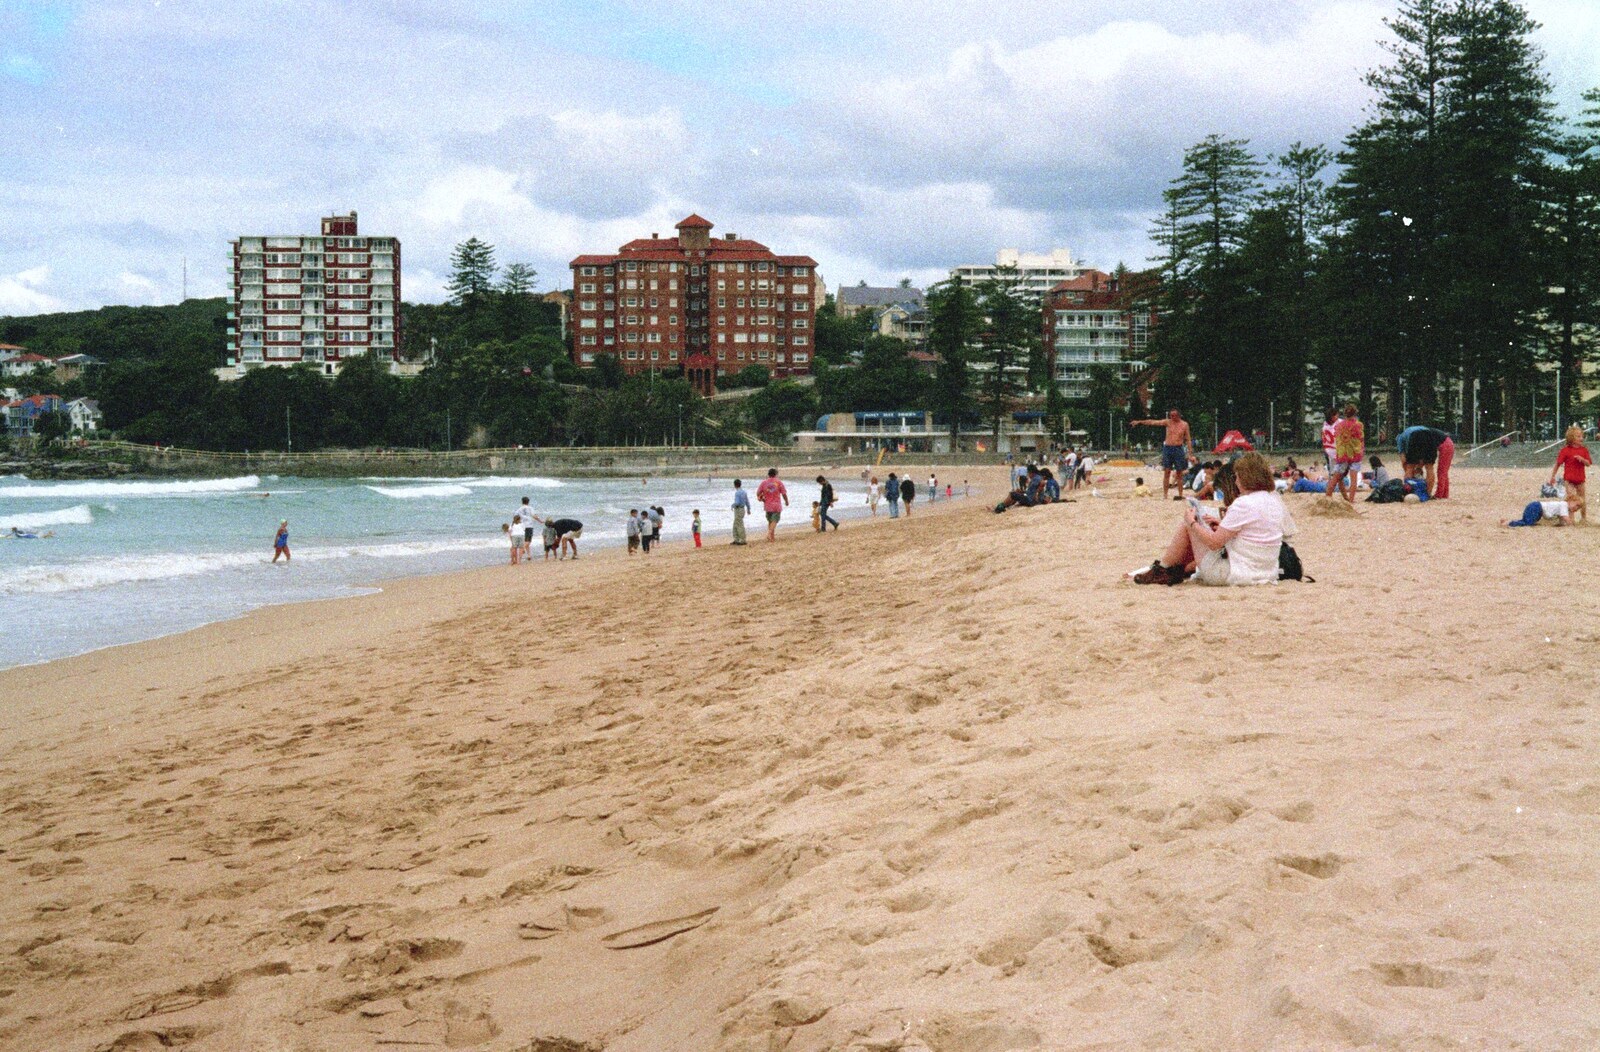 Manly beach from A Trip to the Zoo, Sydney, Australia - 7th April 2000